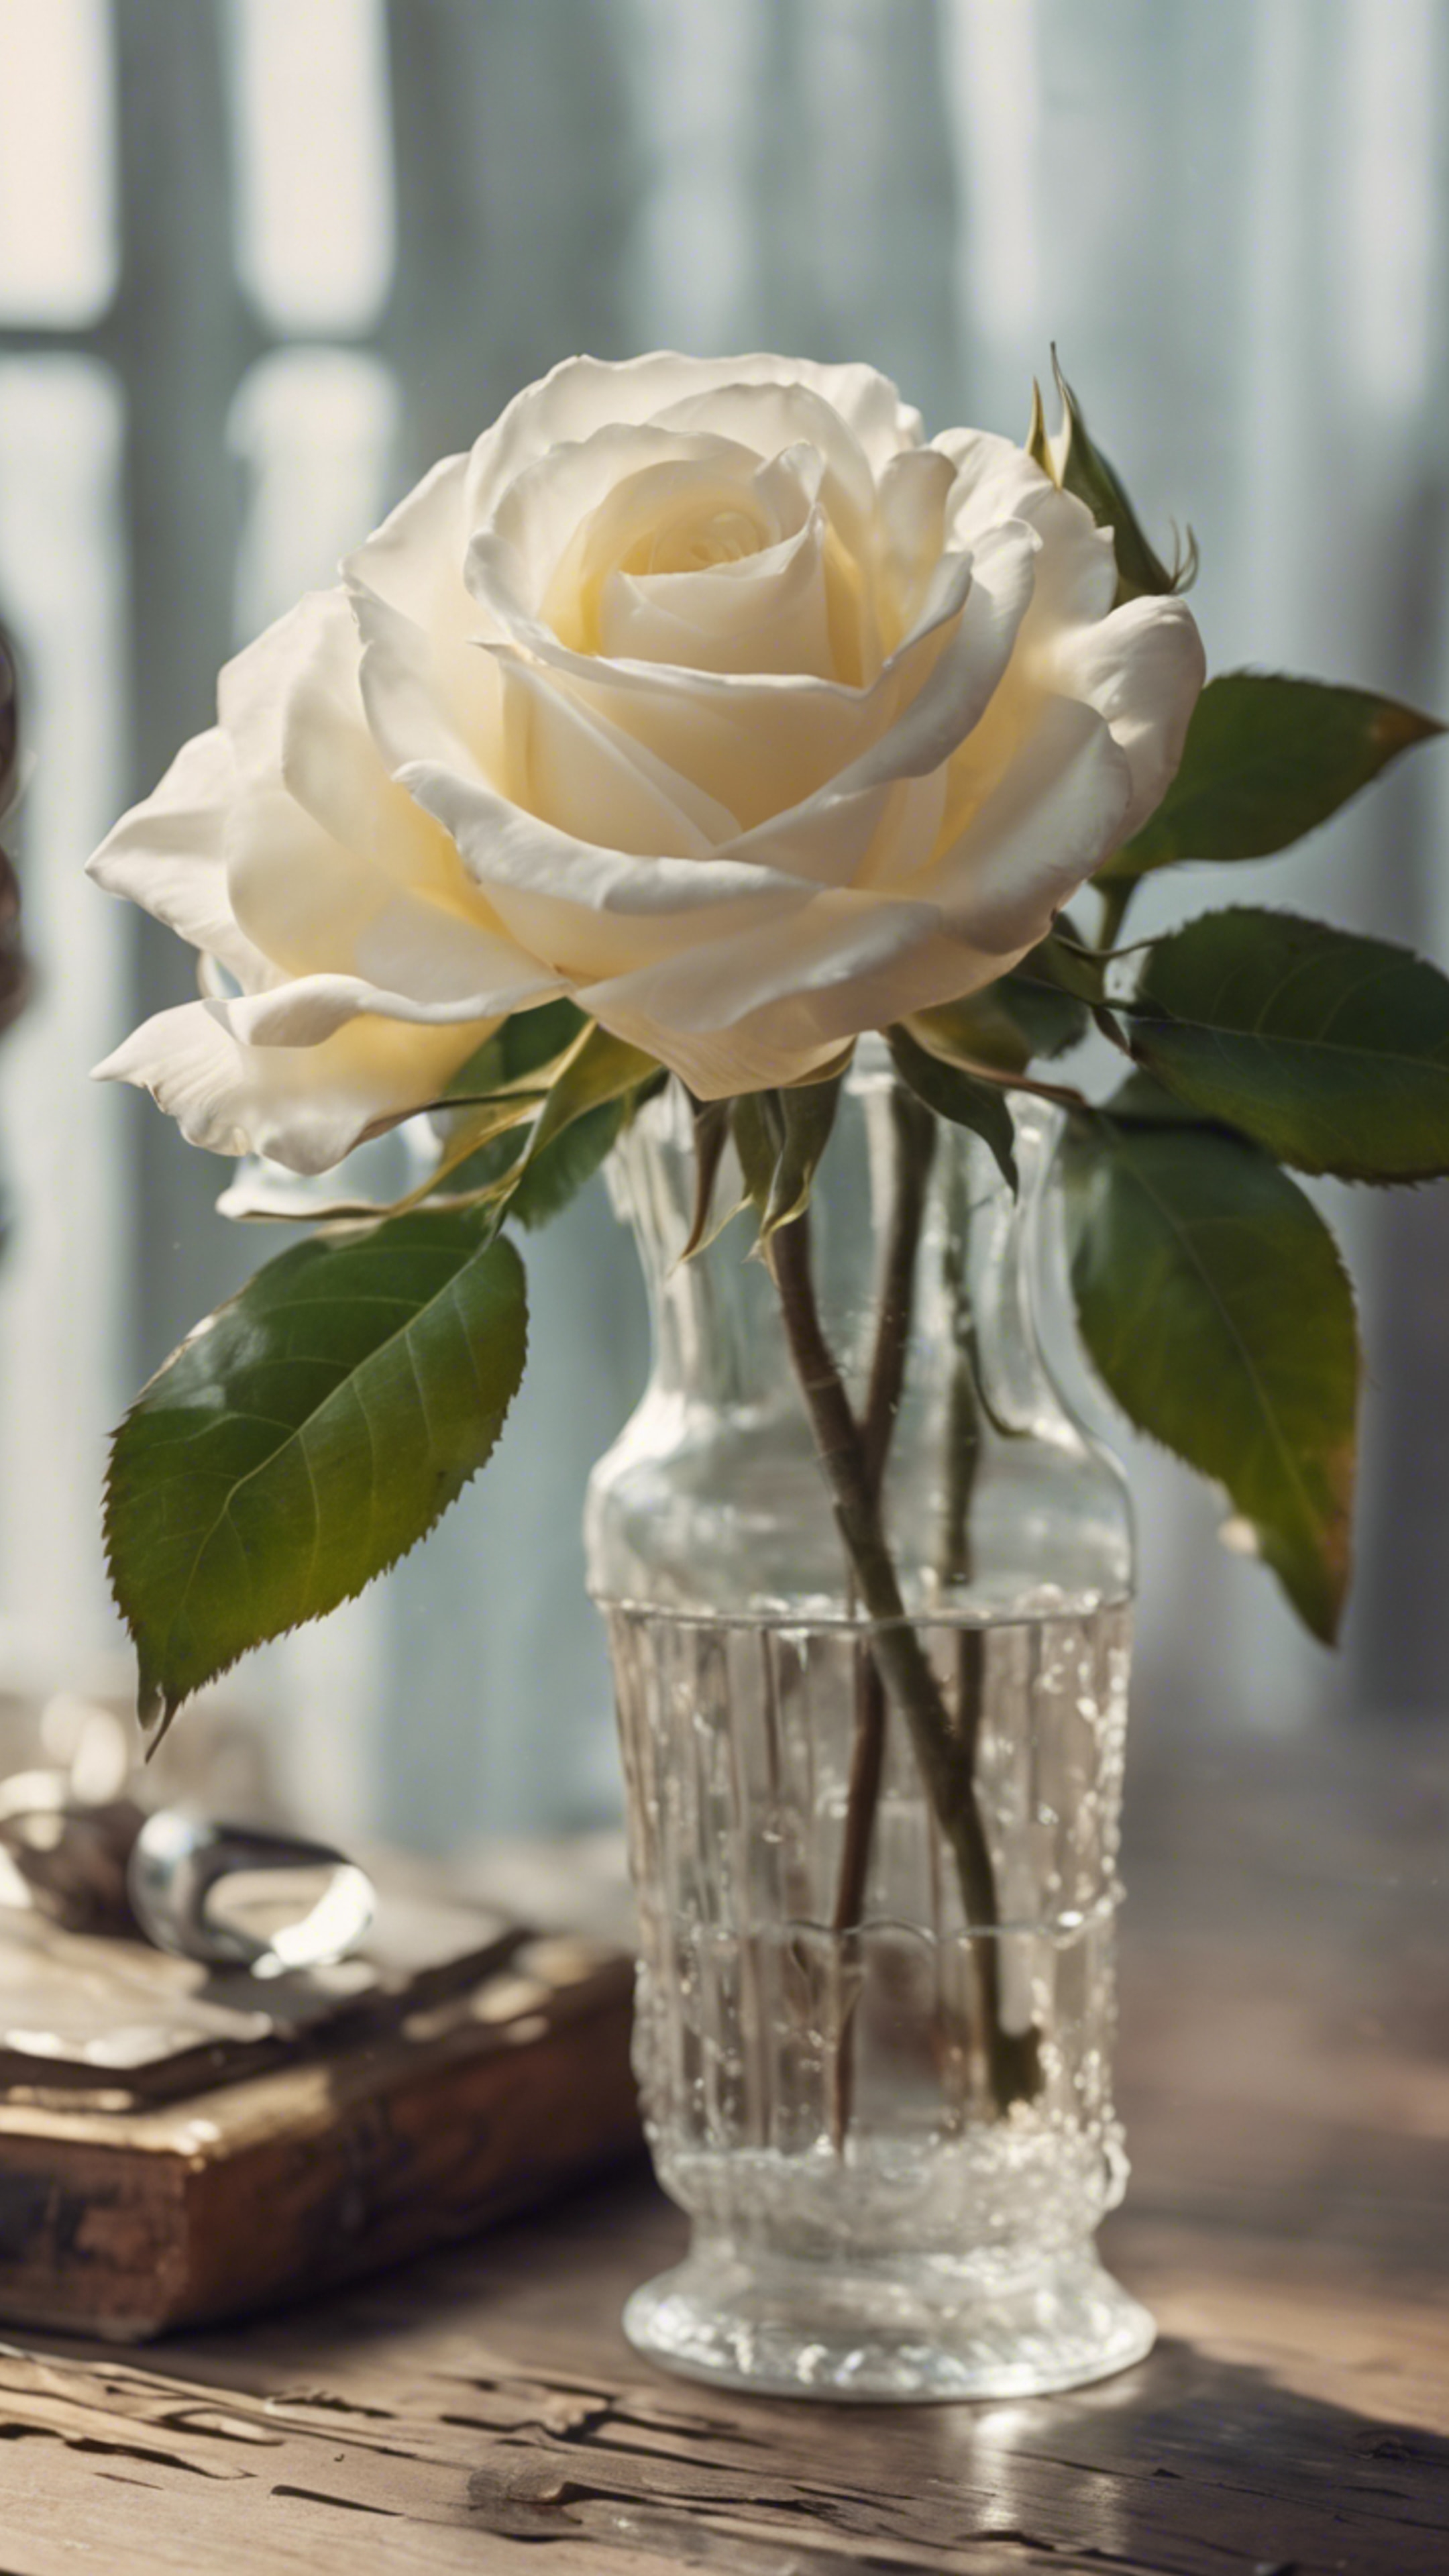 A soft white rose in a vintage glass vase on an antique wooden table. Wallpaper[fc4486b9e2ee4669bbfe]